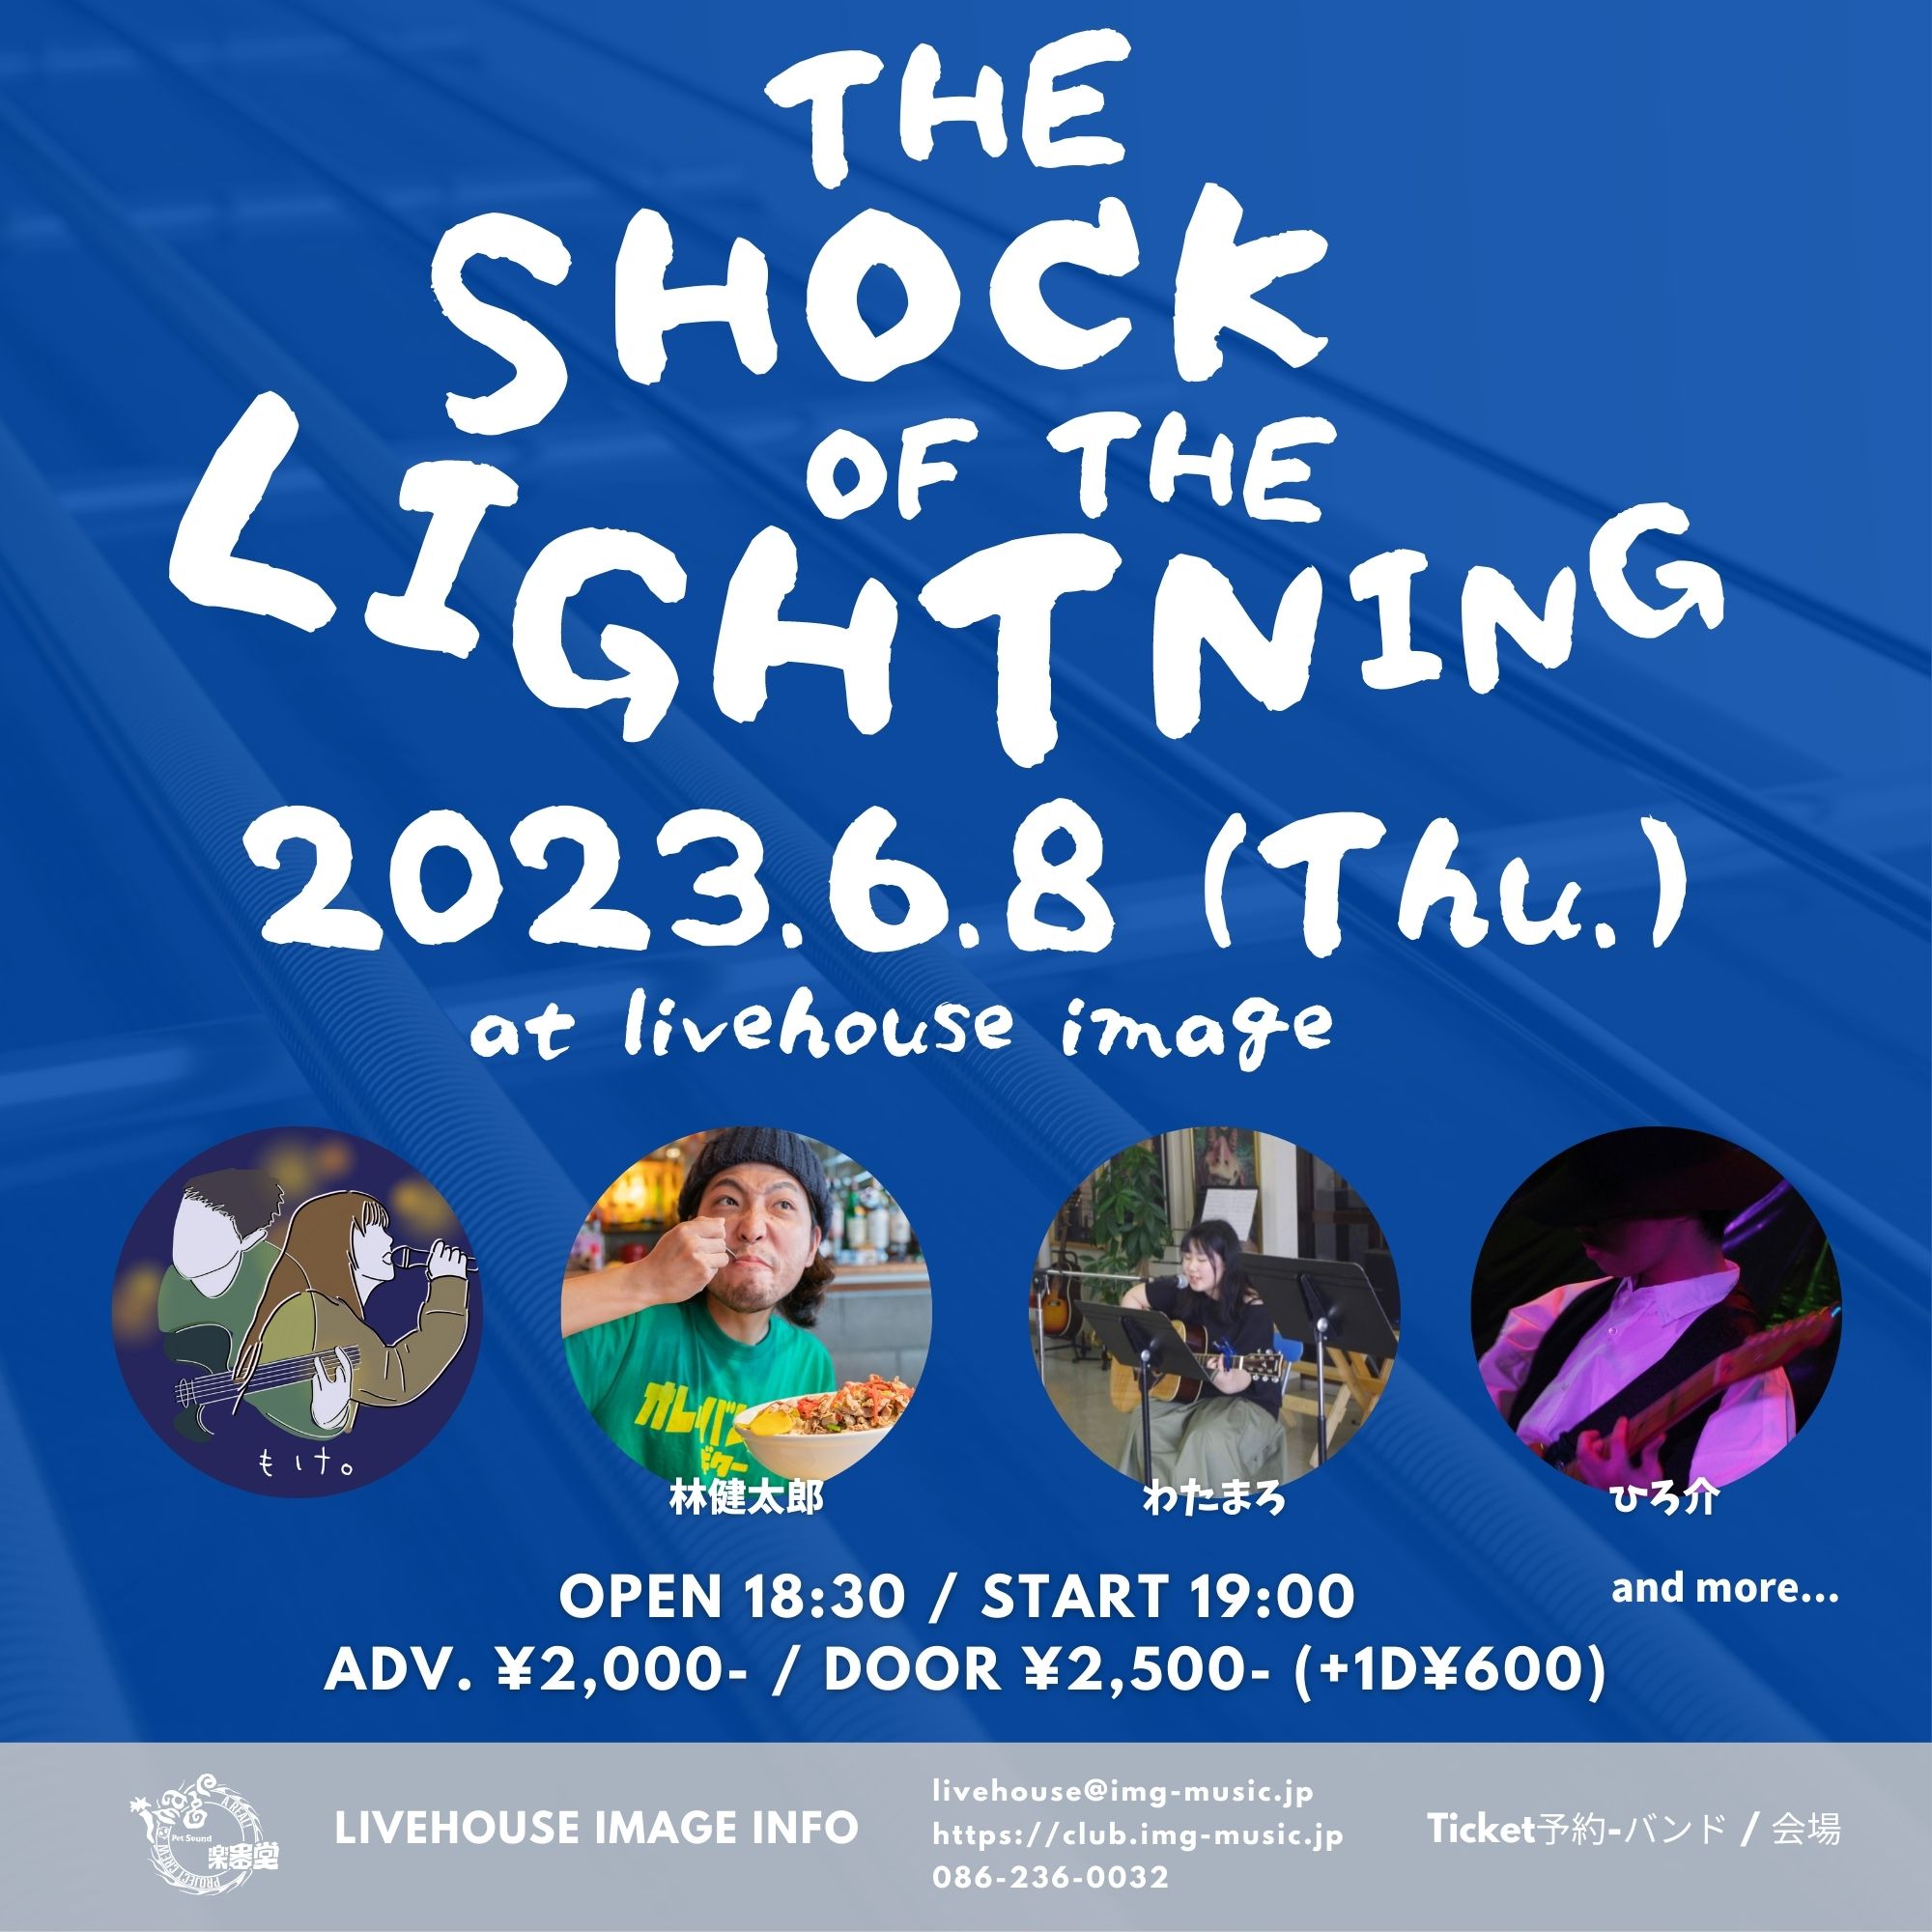 The Shock of the Lightning vol.11